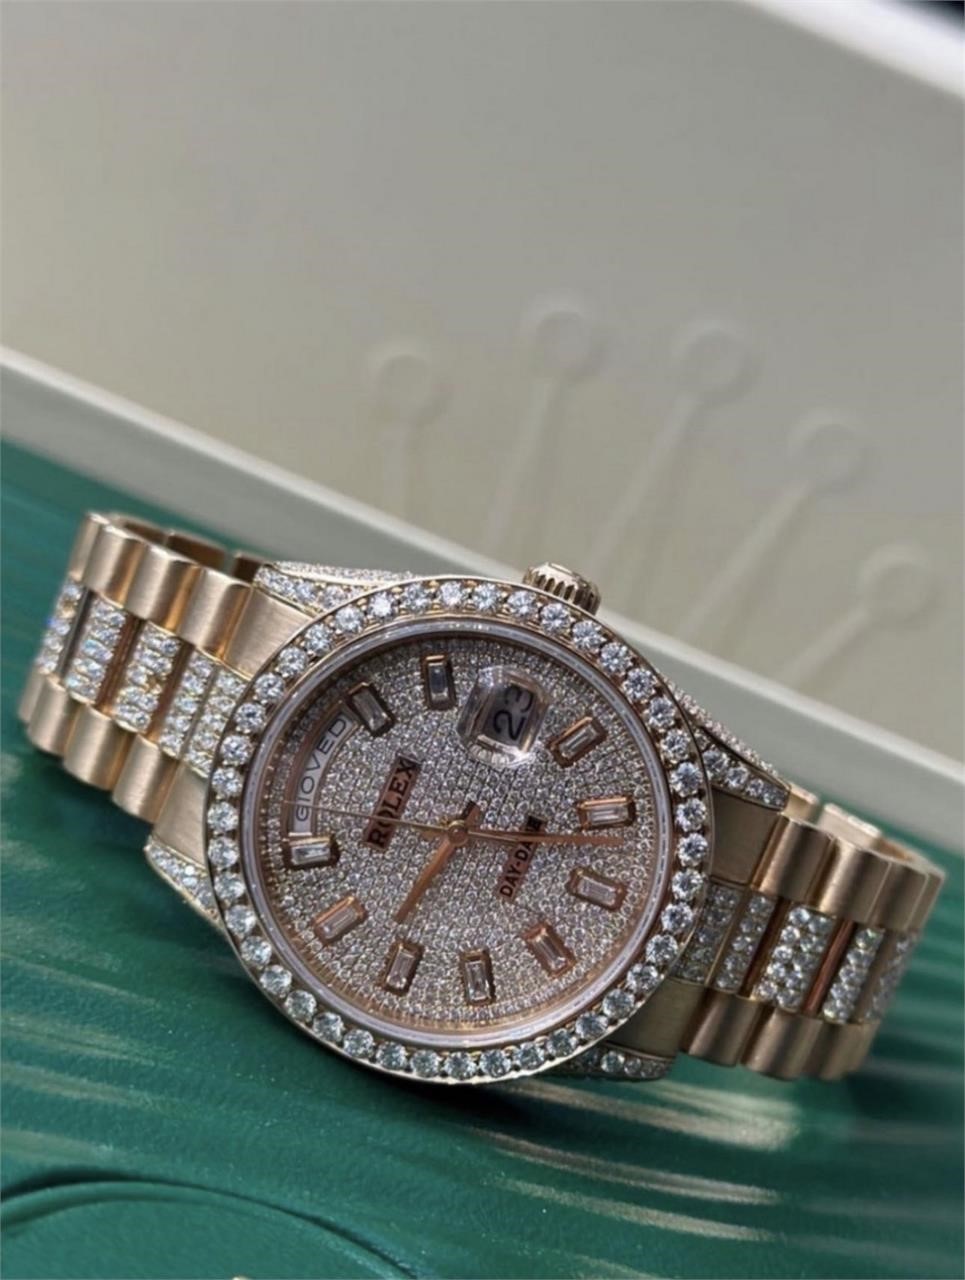 AUTHENTIC JEWELRY AND WATCH SALE JULY 13